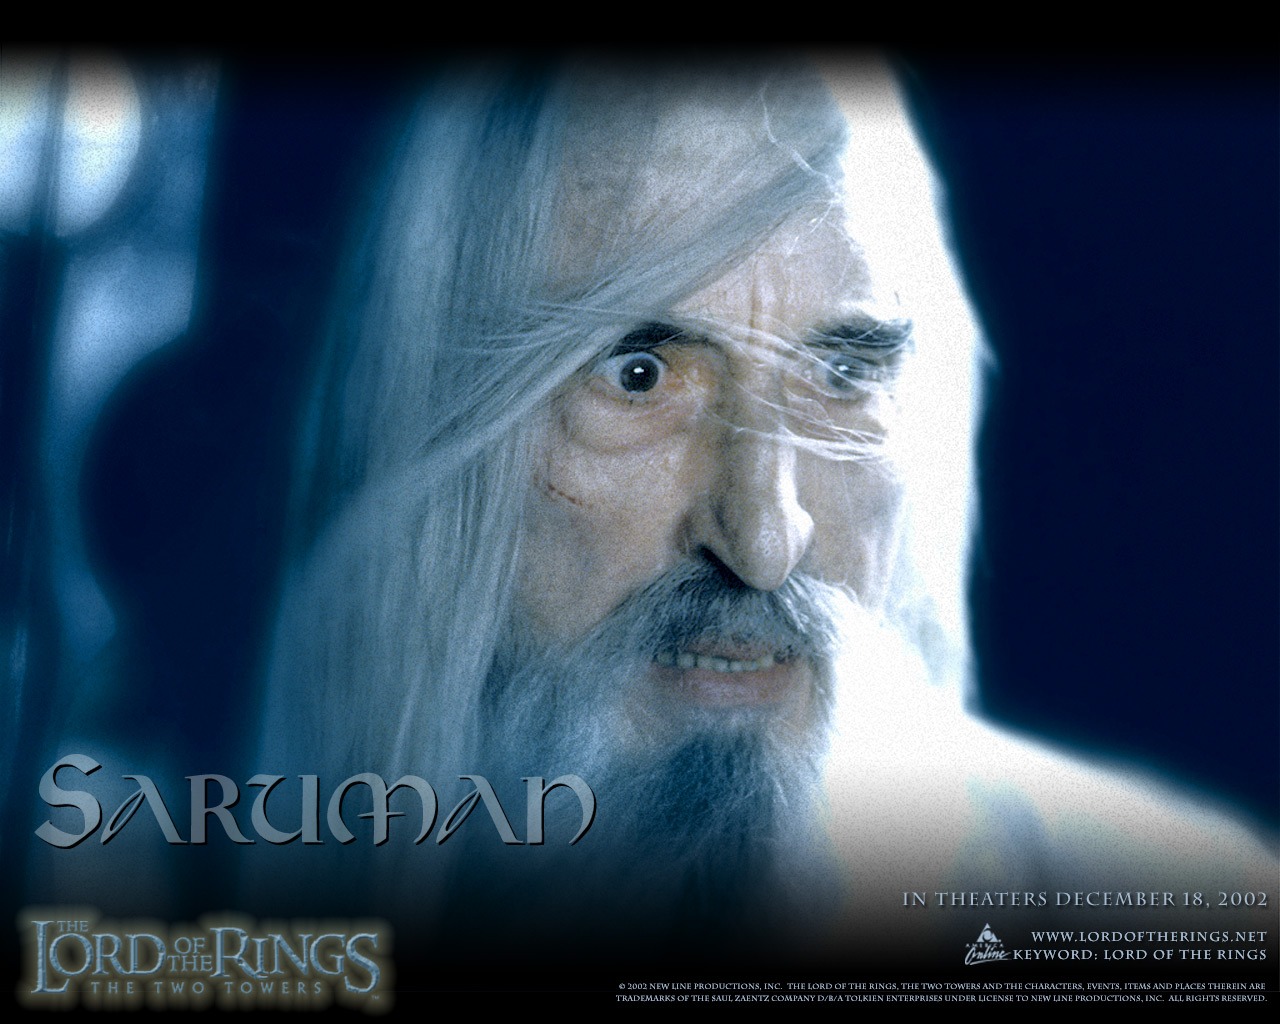 The Lord of the Rings 指環王 #6 - 1280x1024